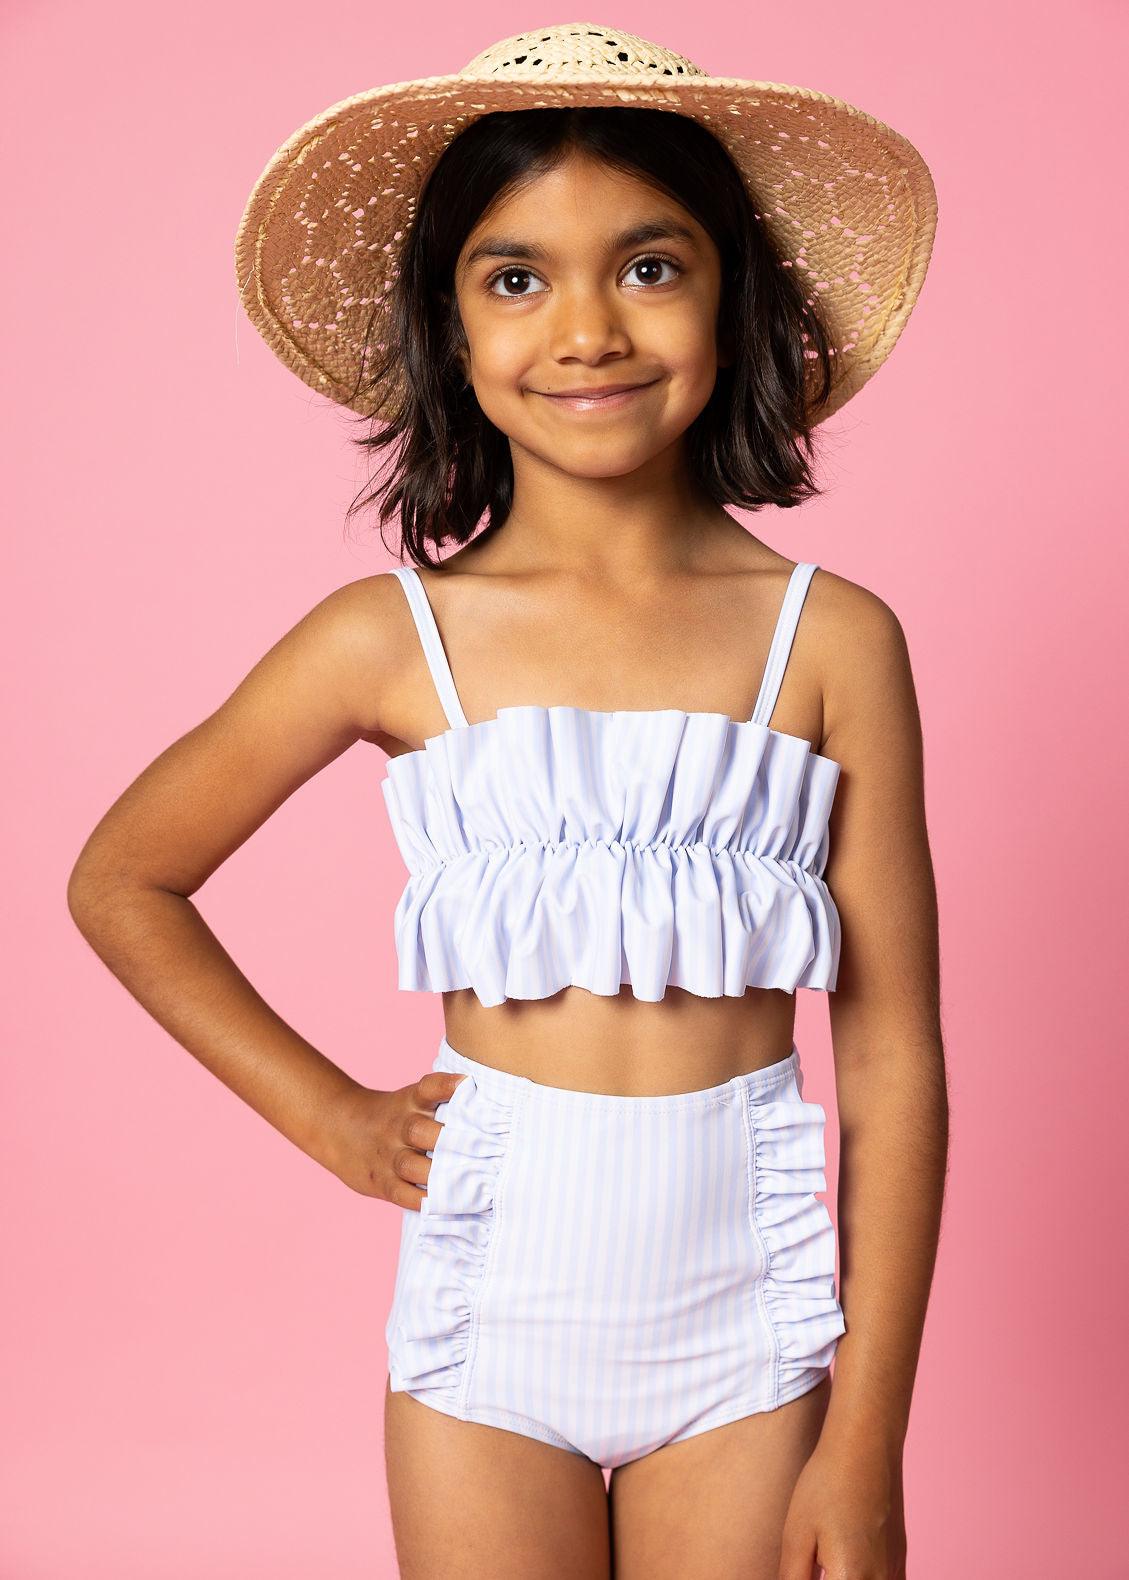 High-Waisted + Crop Top Kids Swimsuits Kortni Jeane Just $14.99! (Reg.  $25.00) Plus, FREE Shipping! - Common Sense With Money